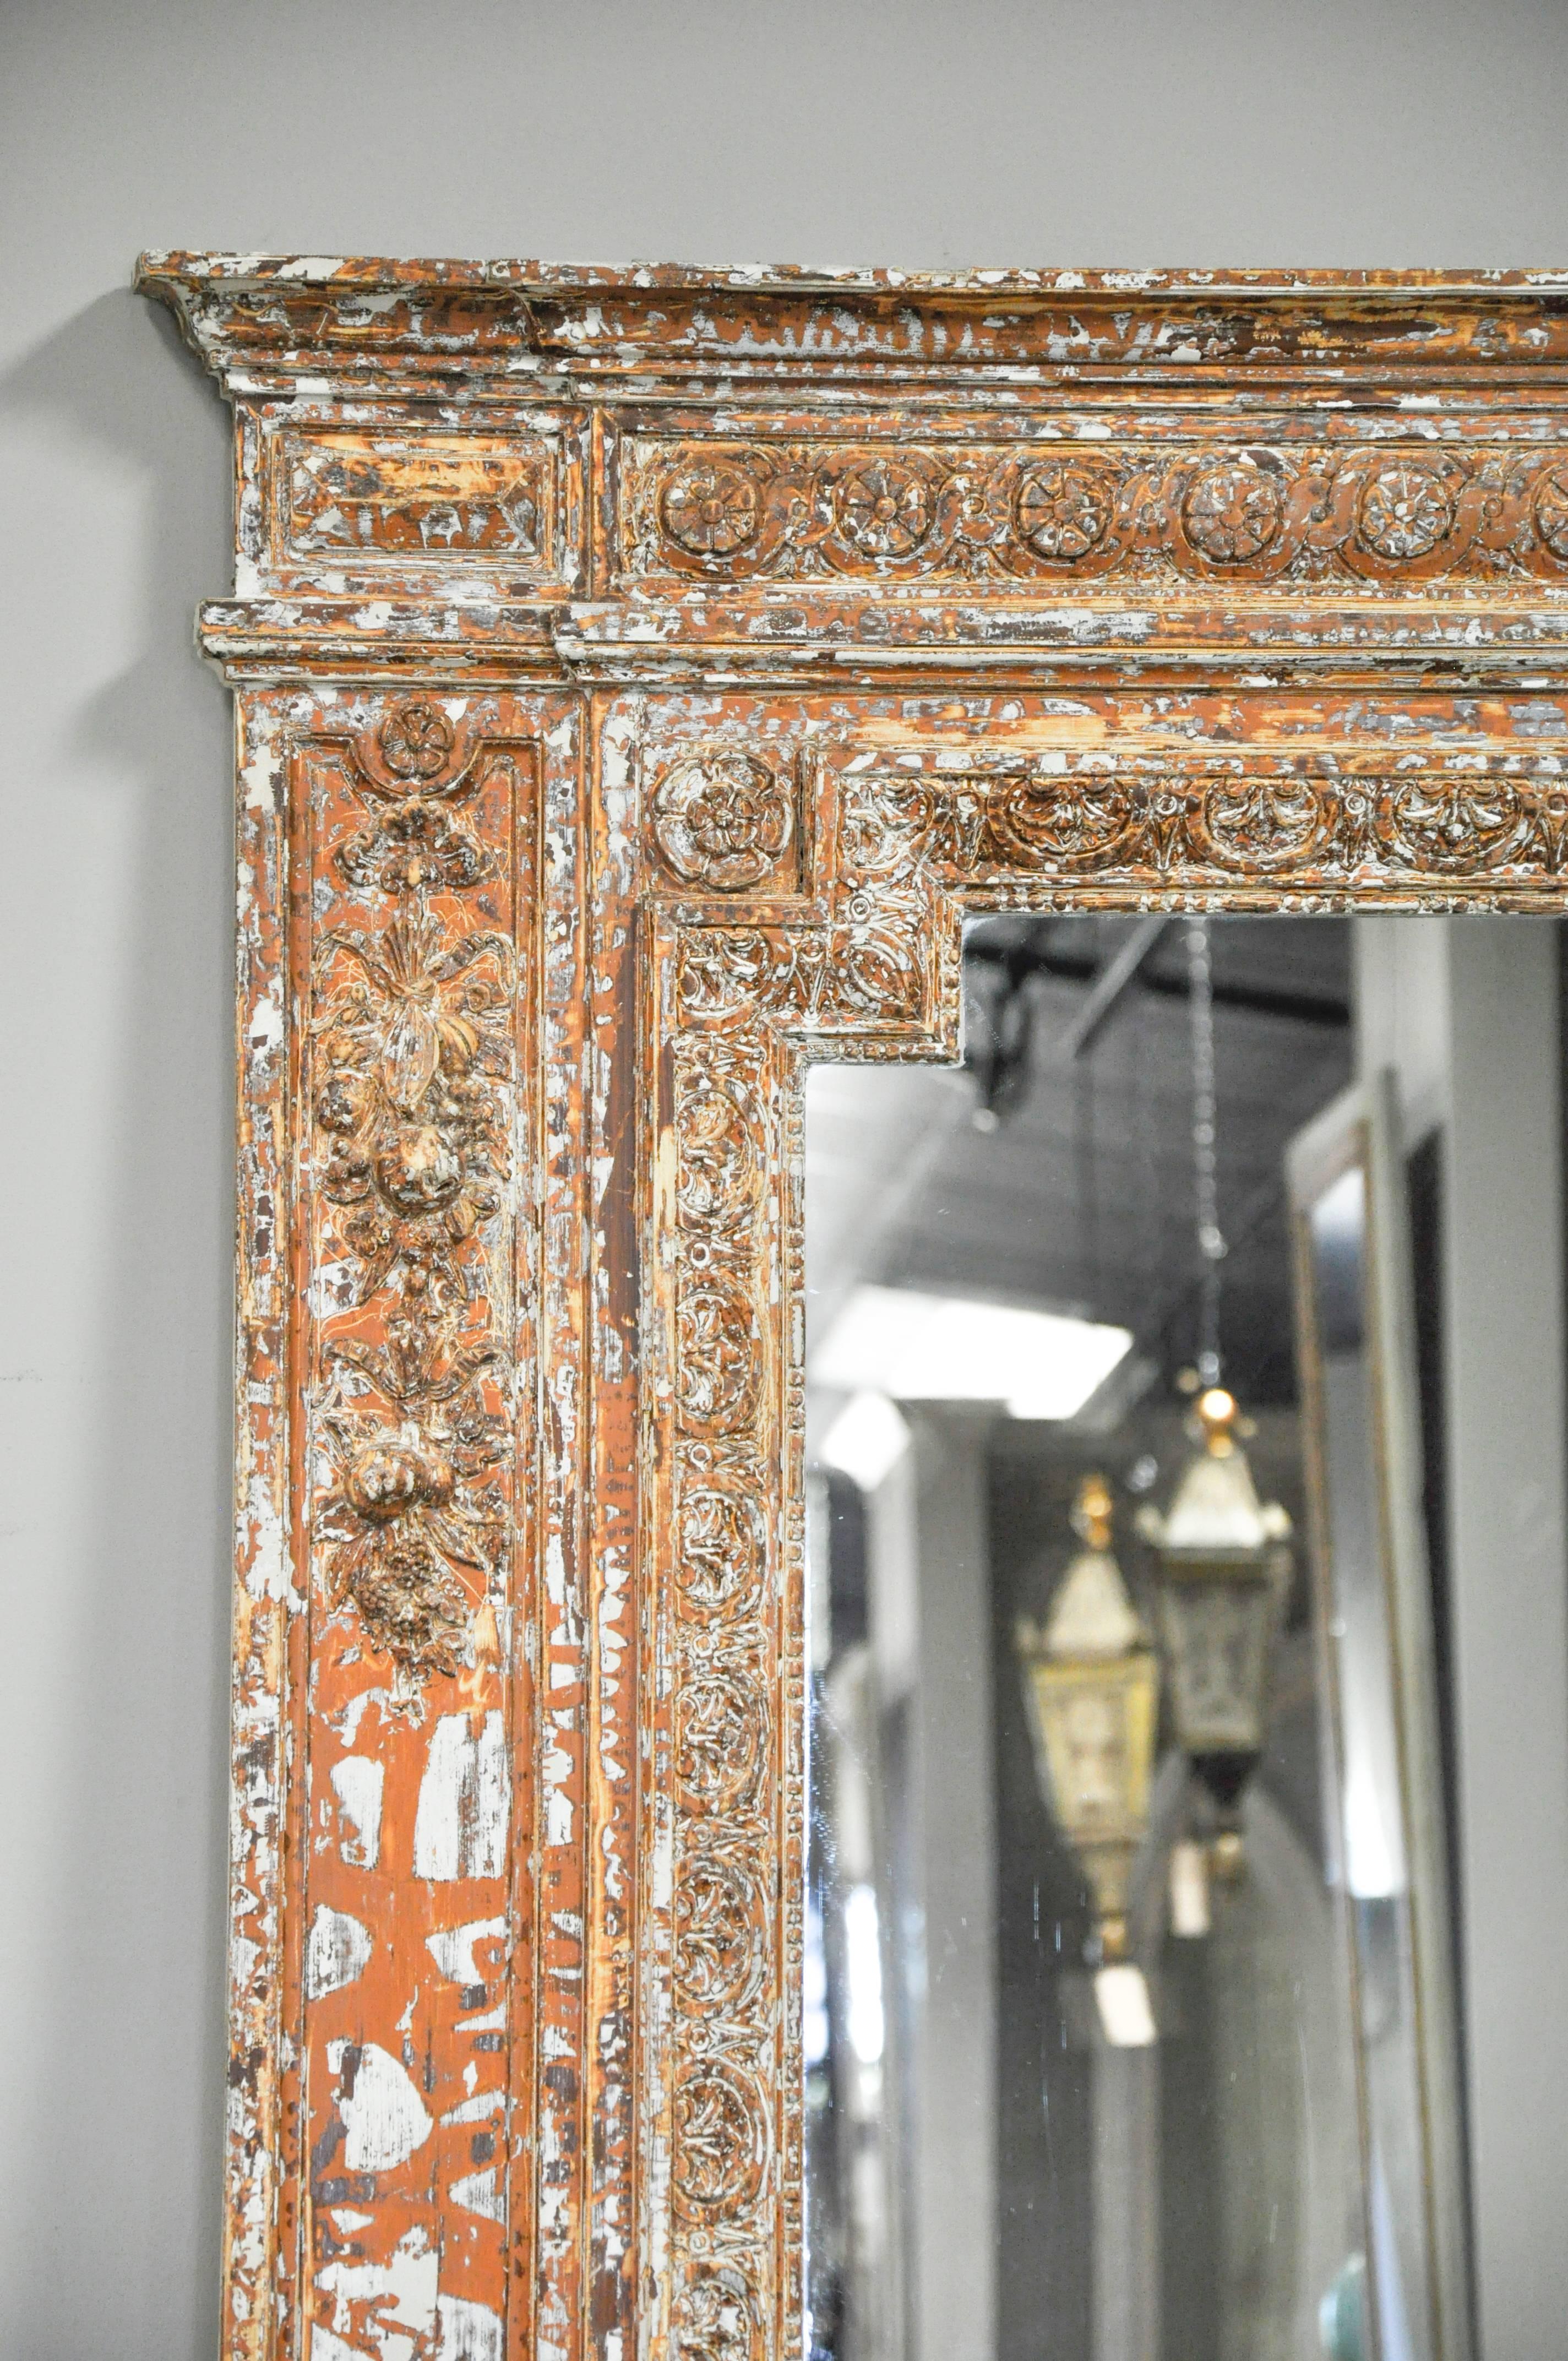 Stunning, oversized 19th century French mirror. The carved frame includes rosettes, floral garland, bow and leaf motif and beautiful molding details. A stripped finish reveals distressed pine and plaster with salmon overtones. Would make a